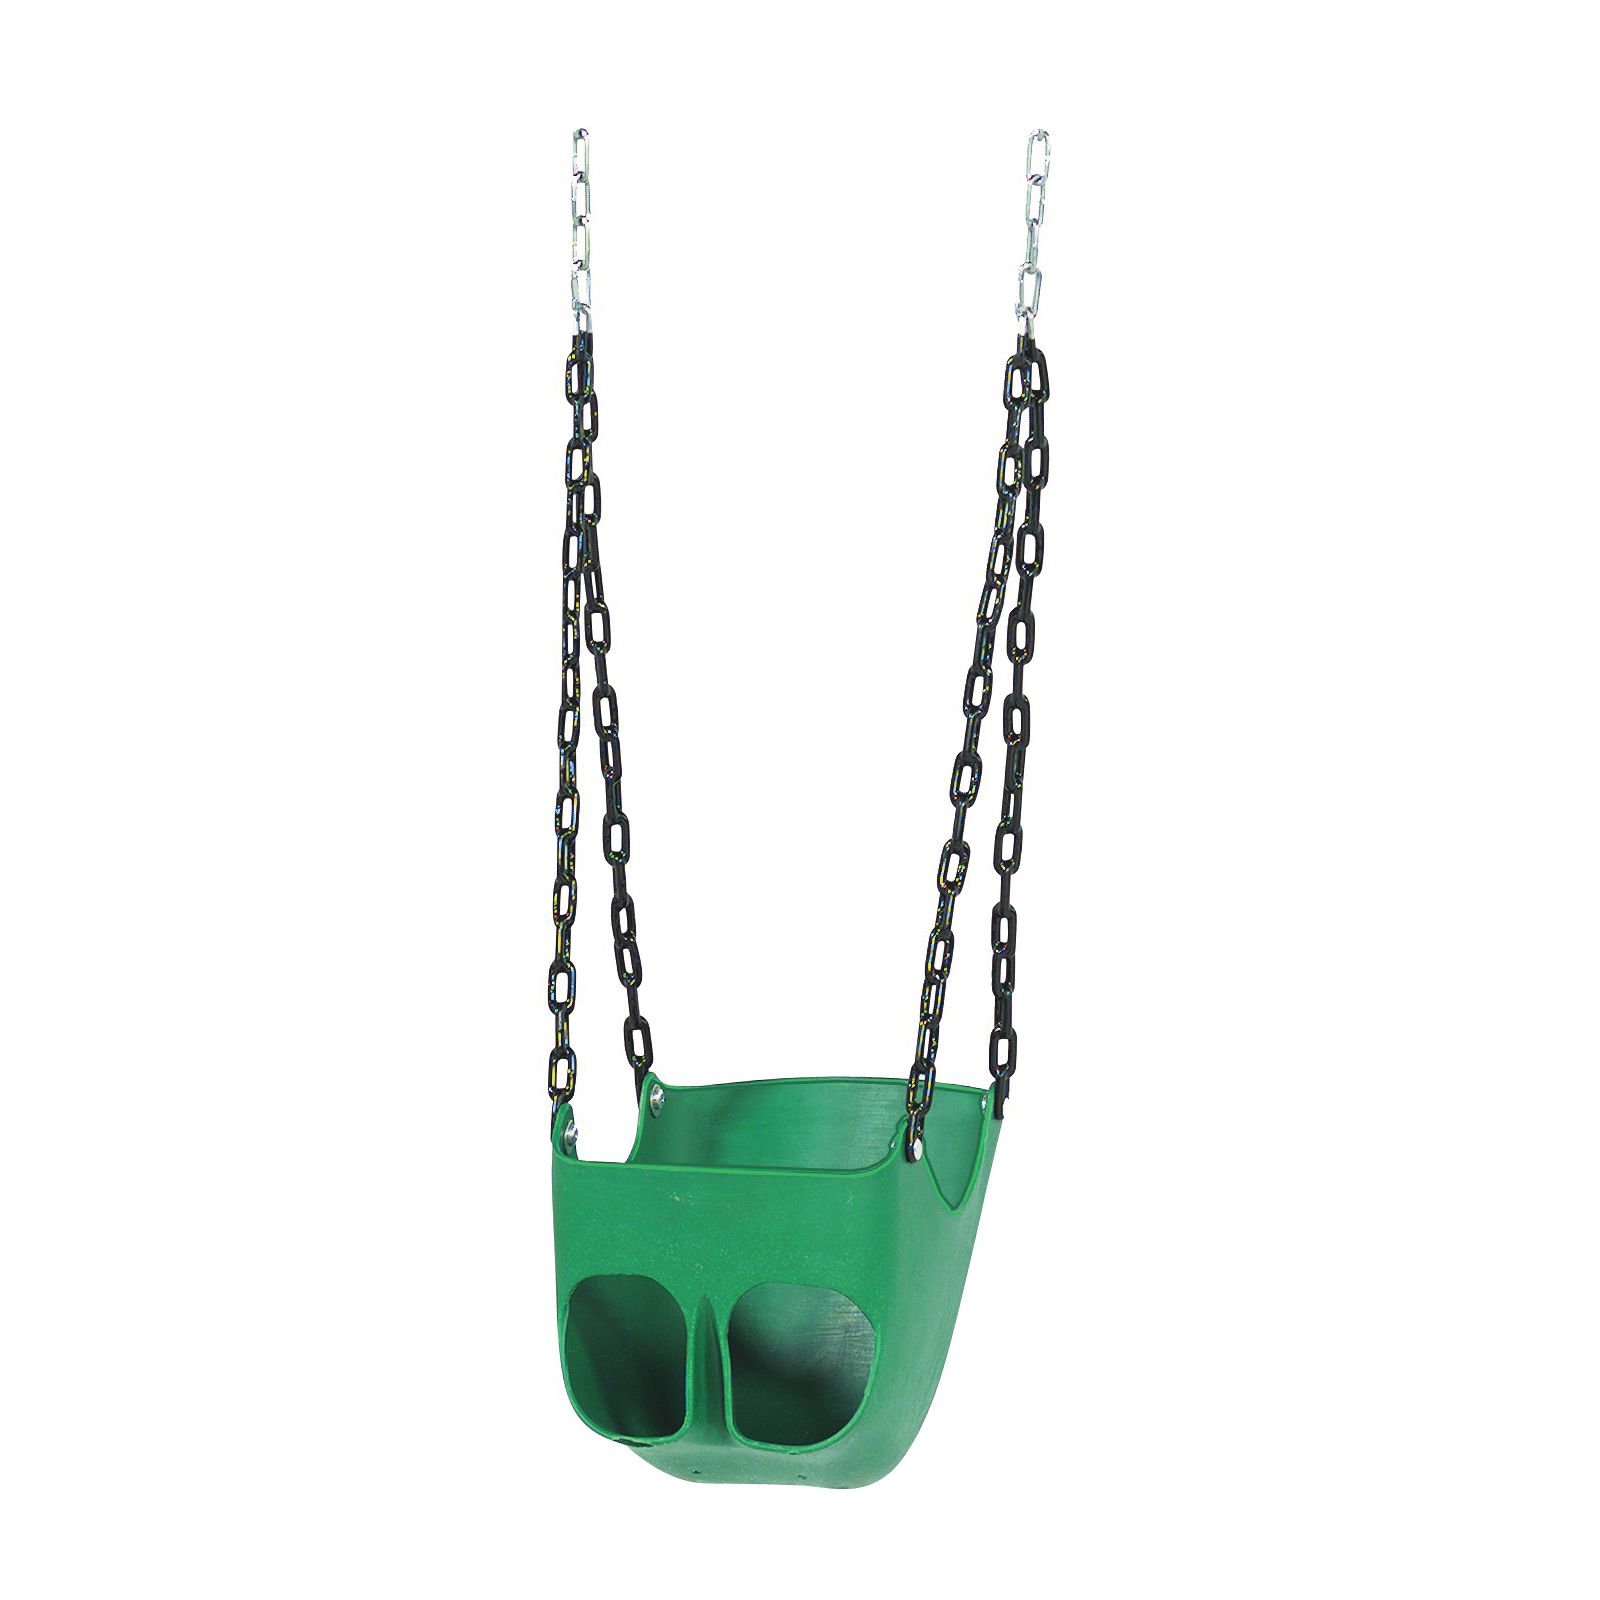 PS 7534 Toddler Swing, Metal Chain/Rope